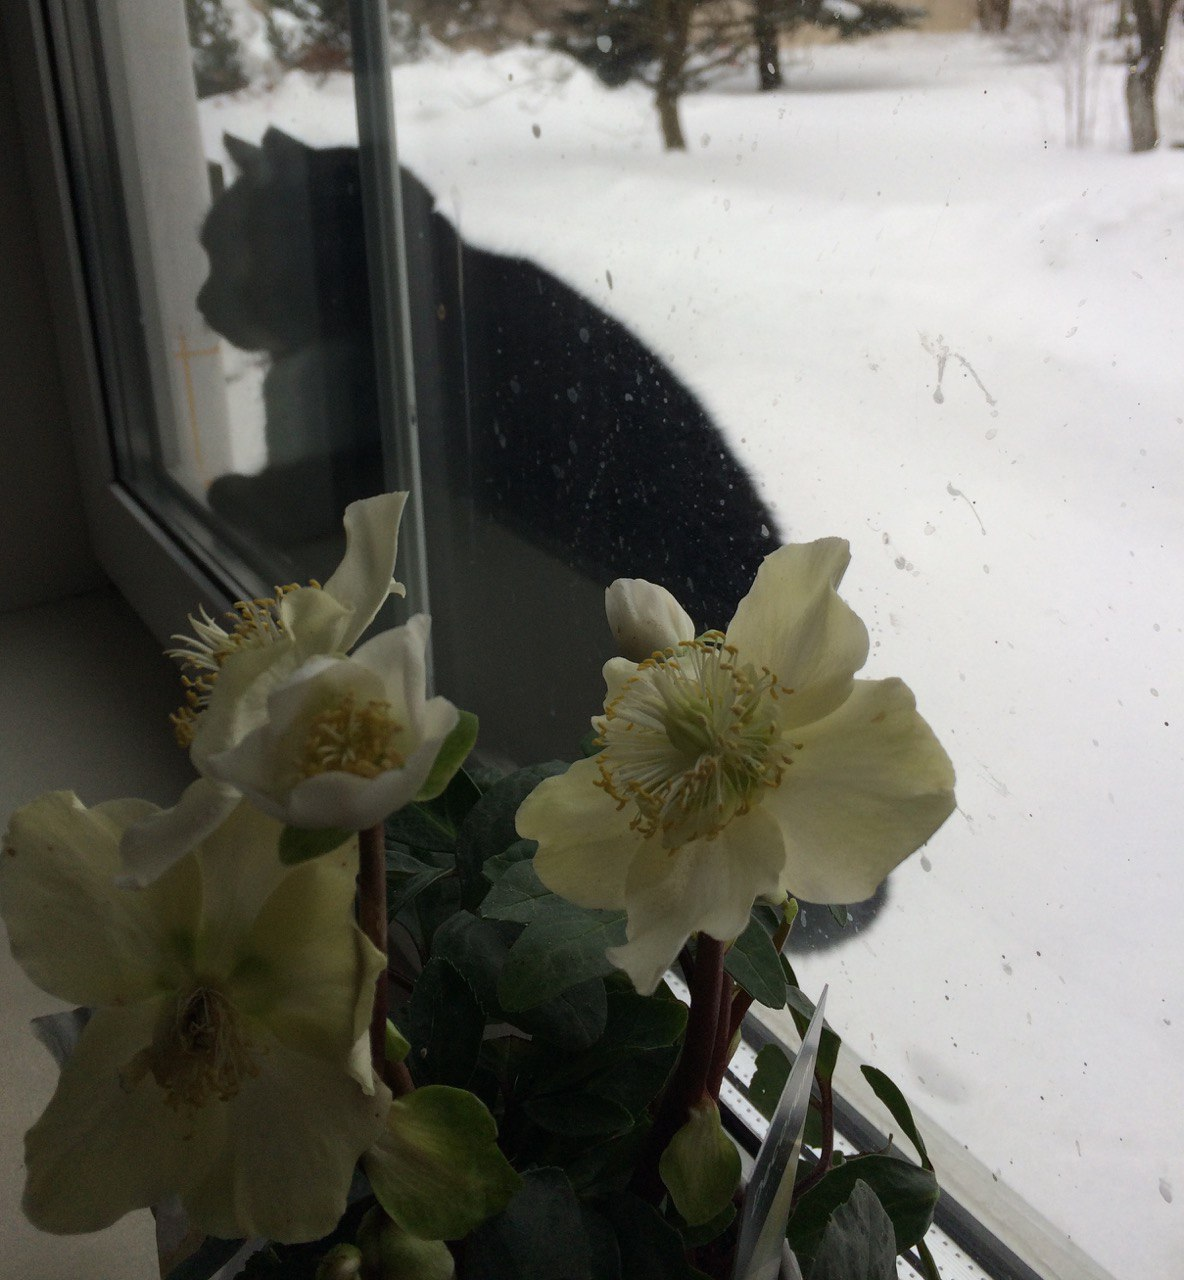 Let me in the warmth, to the flowers... - My, cat, Black cat, Winter, Outside the window, Cold, Flowers, Windowsill